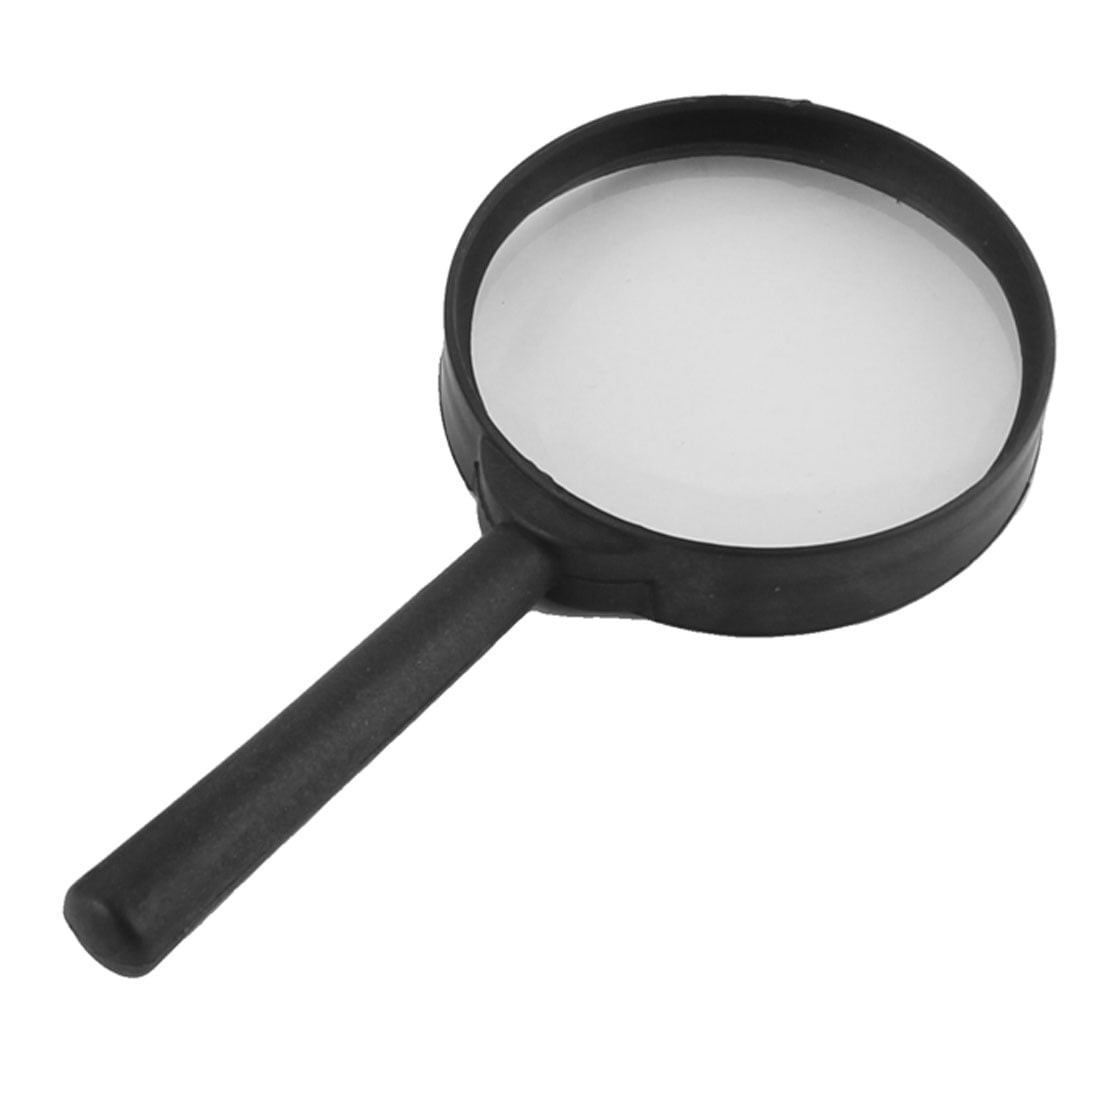 Albums 98+ Pictures Pictures Of Magnifying Glasses Excellent